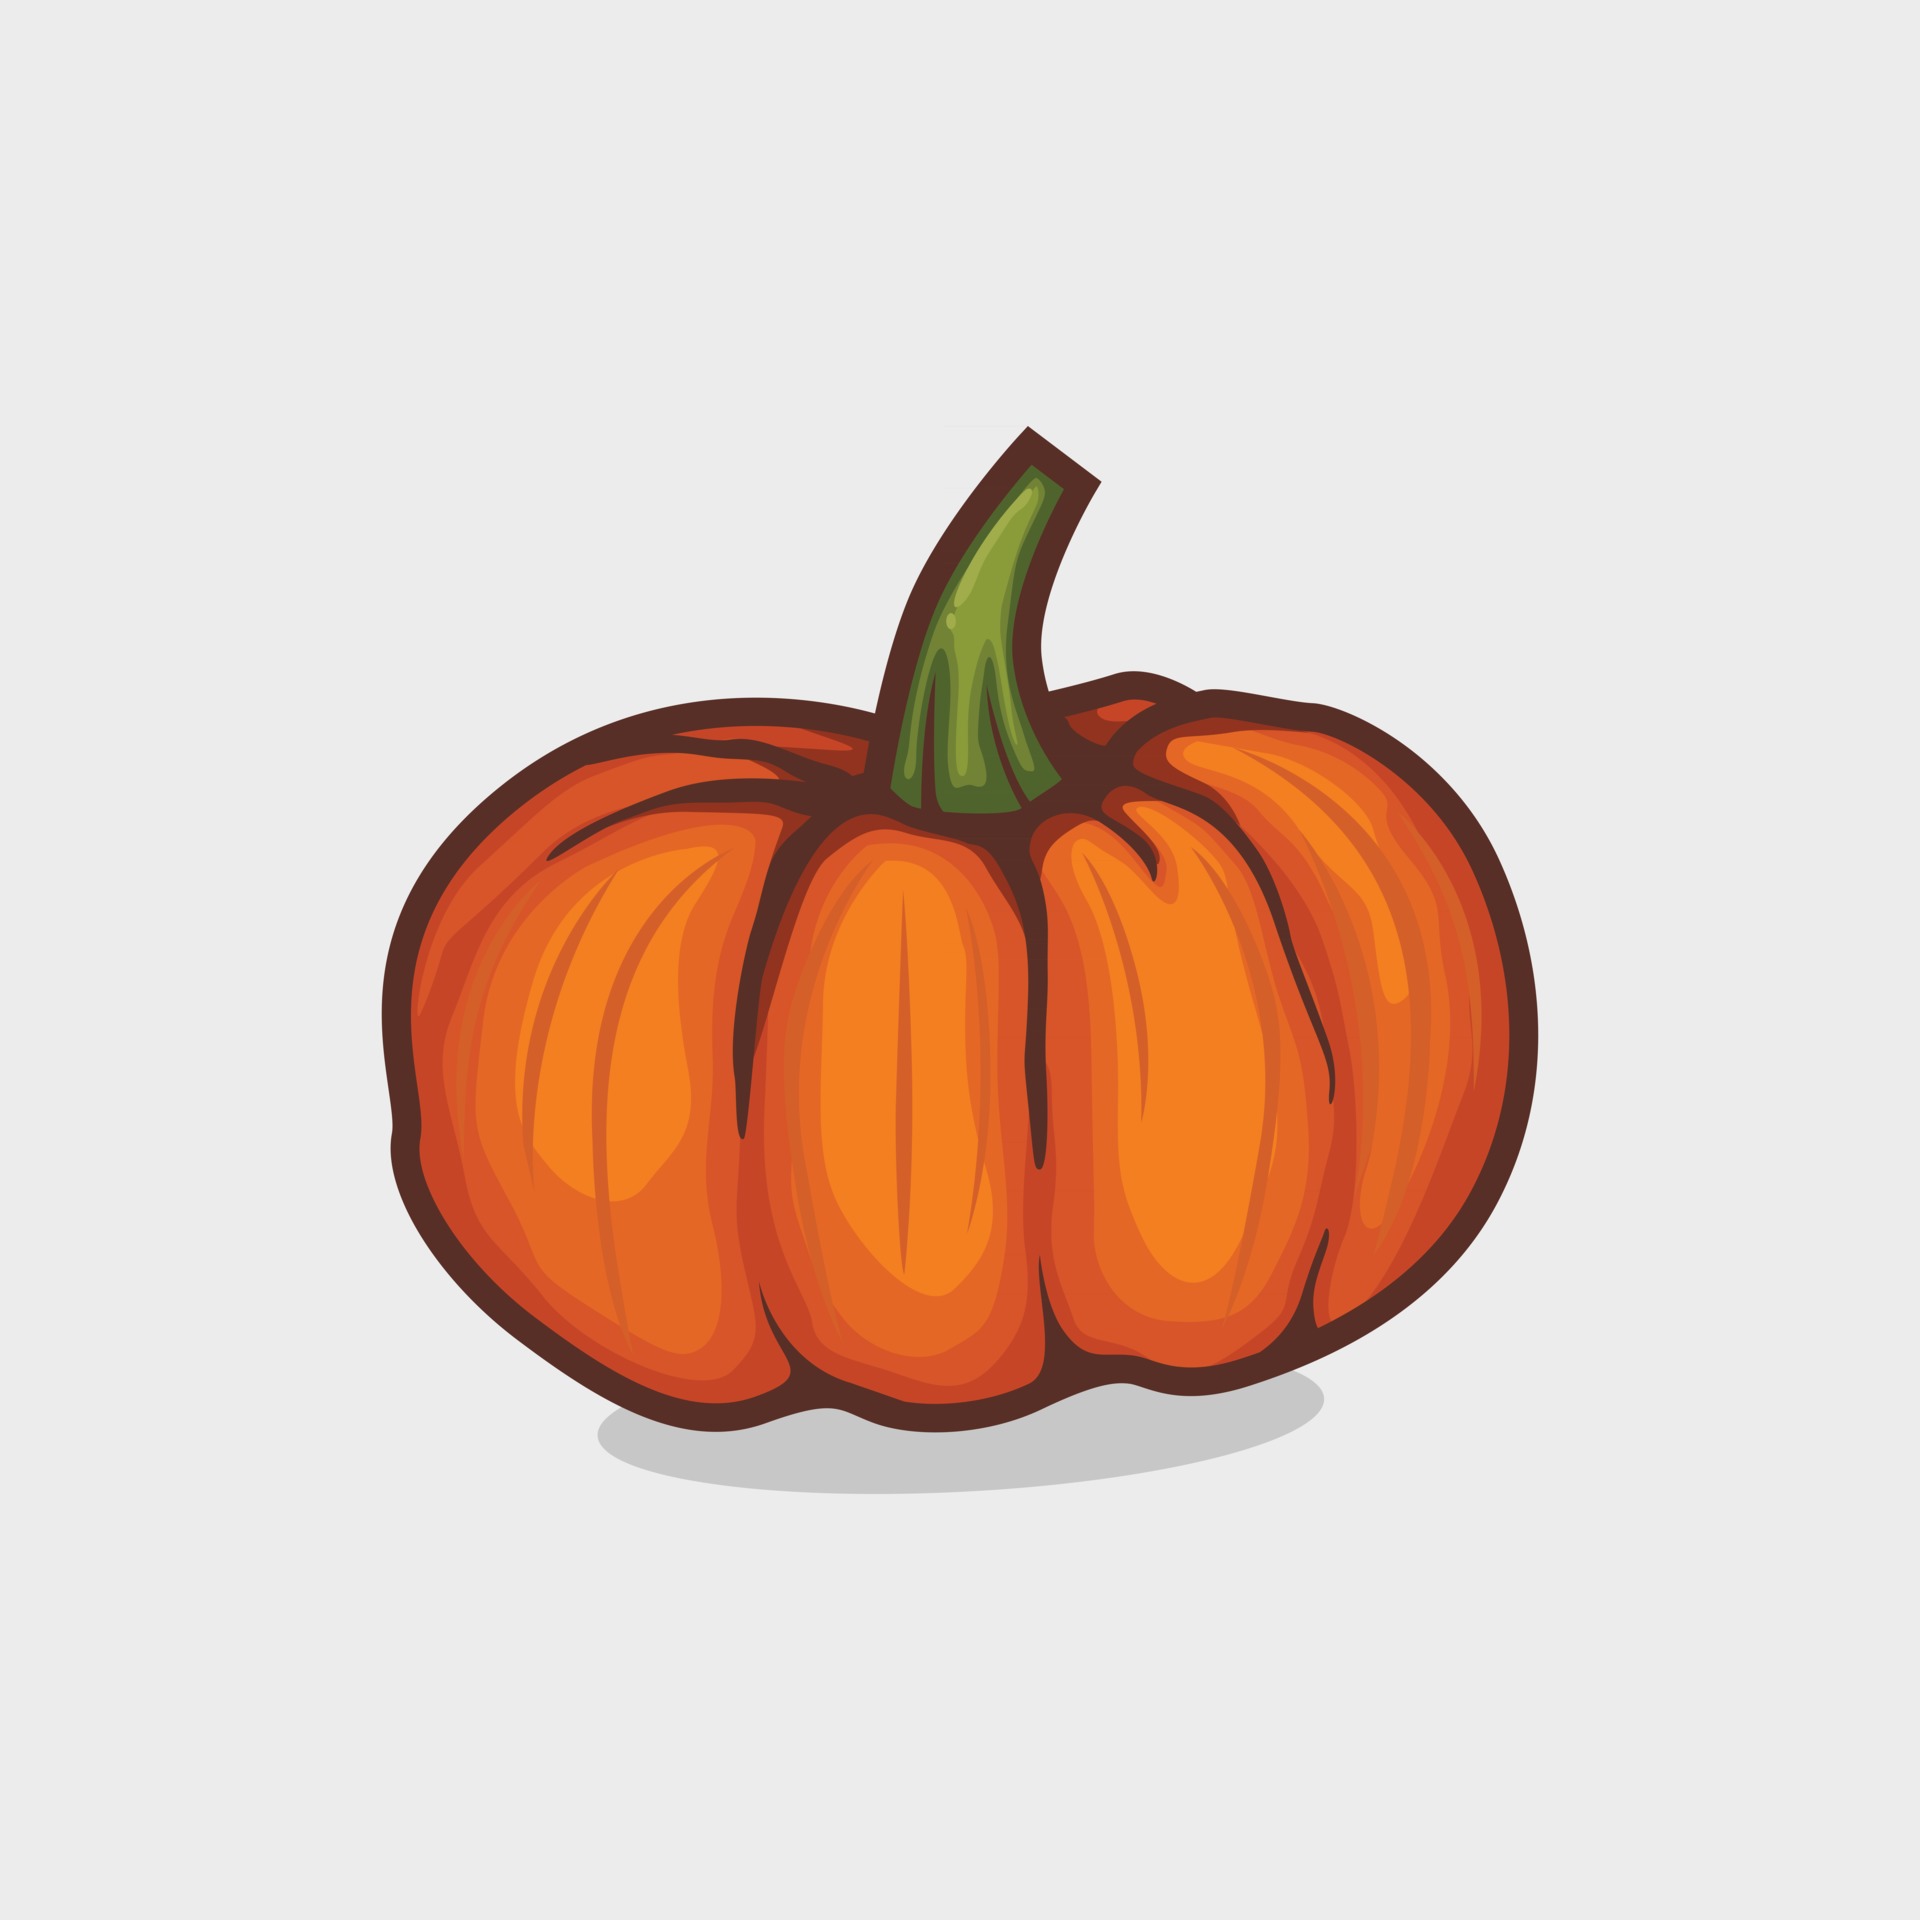 Pumpkin outline drawing Royalty Free Vector Image